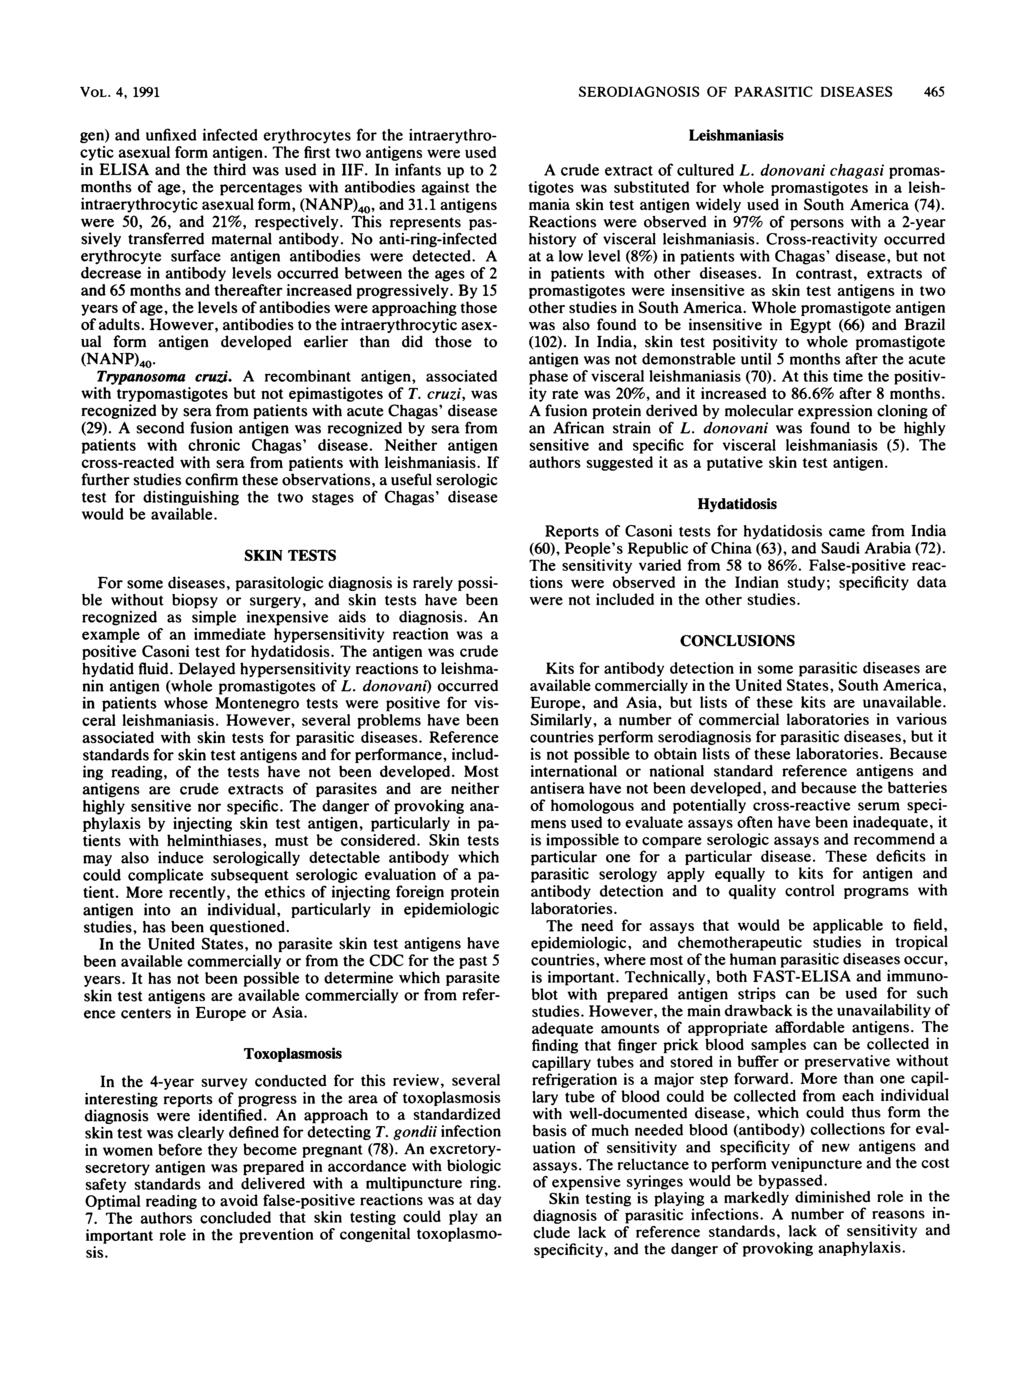 VOL. 4, 1991 gen) and unfixed infected erythrocytes for the intraerythrocytic asexual form antigen. The first two antigens were used in ELISA and the third was used in IIF.